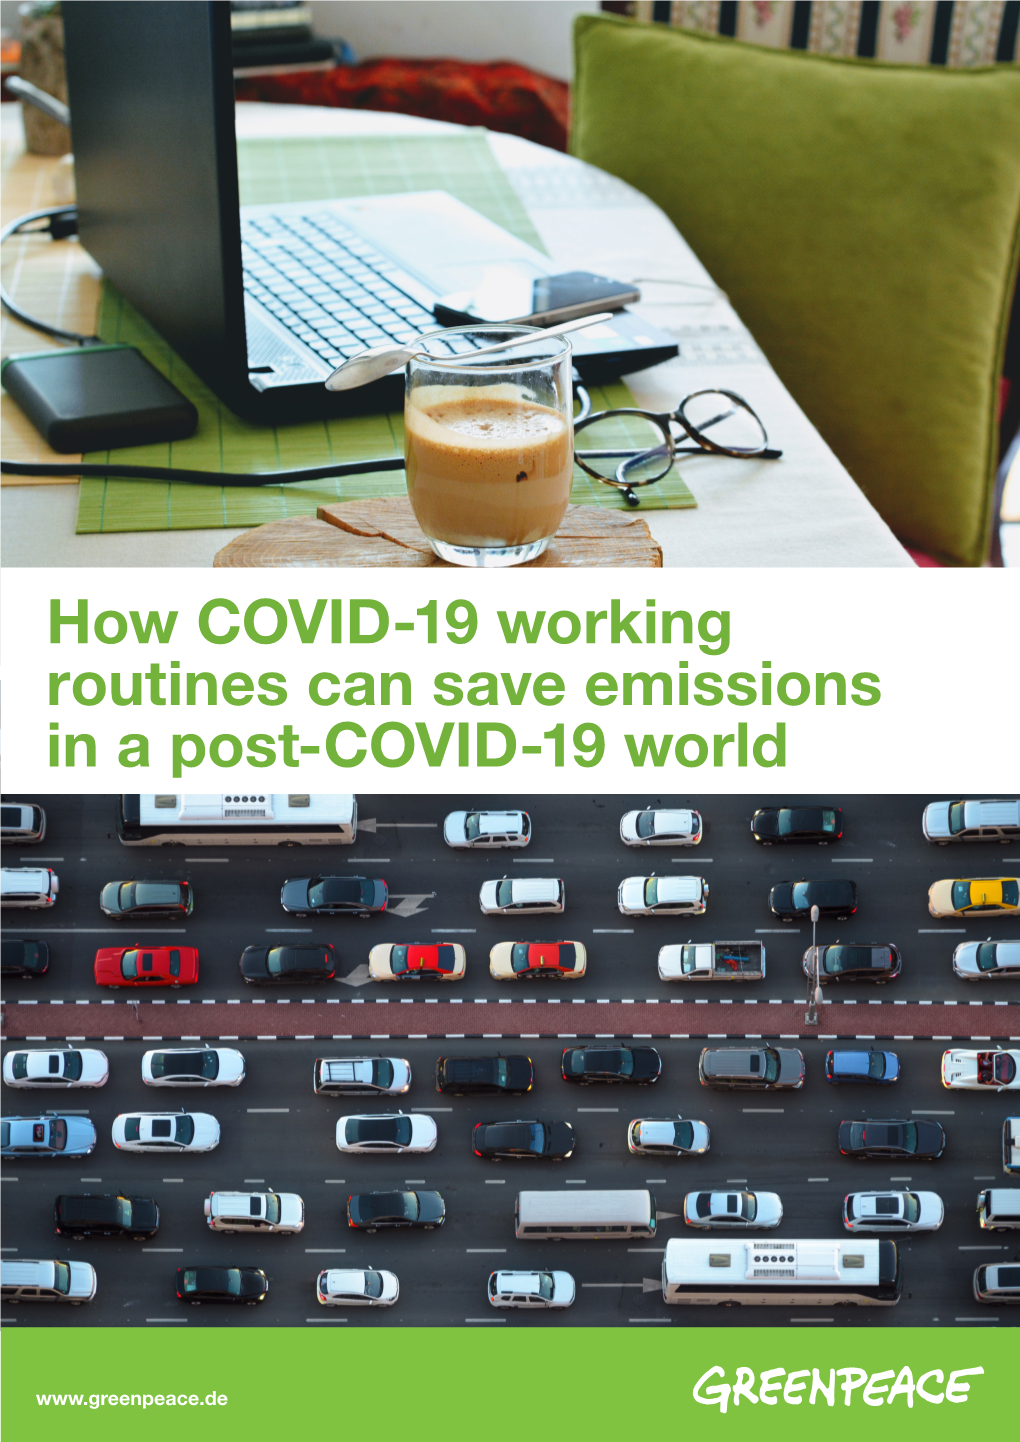 How COVID-19 Working Routines Can Save Emissions in a Post-COVID-19 World